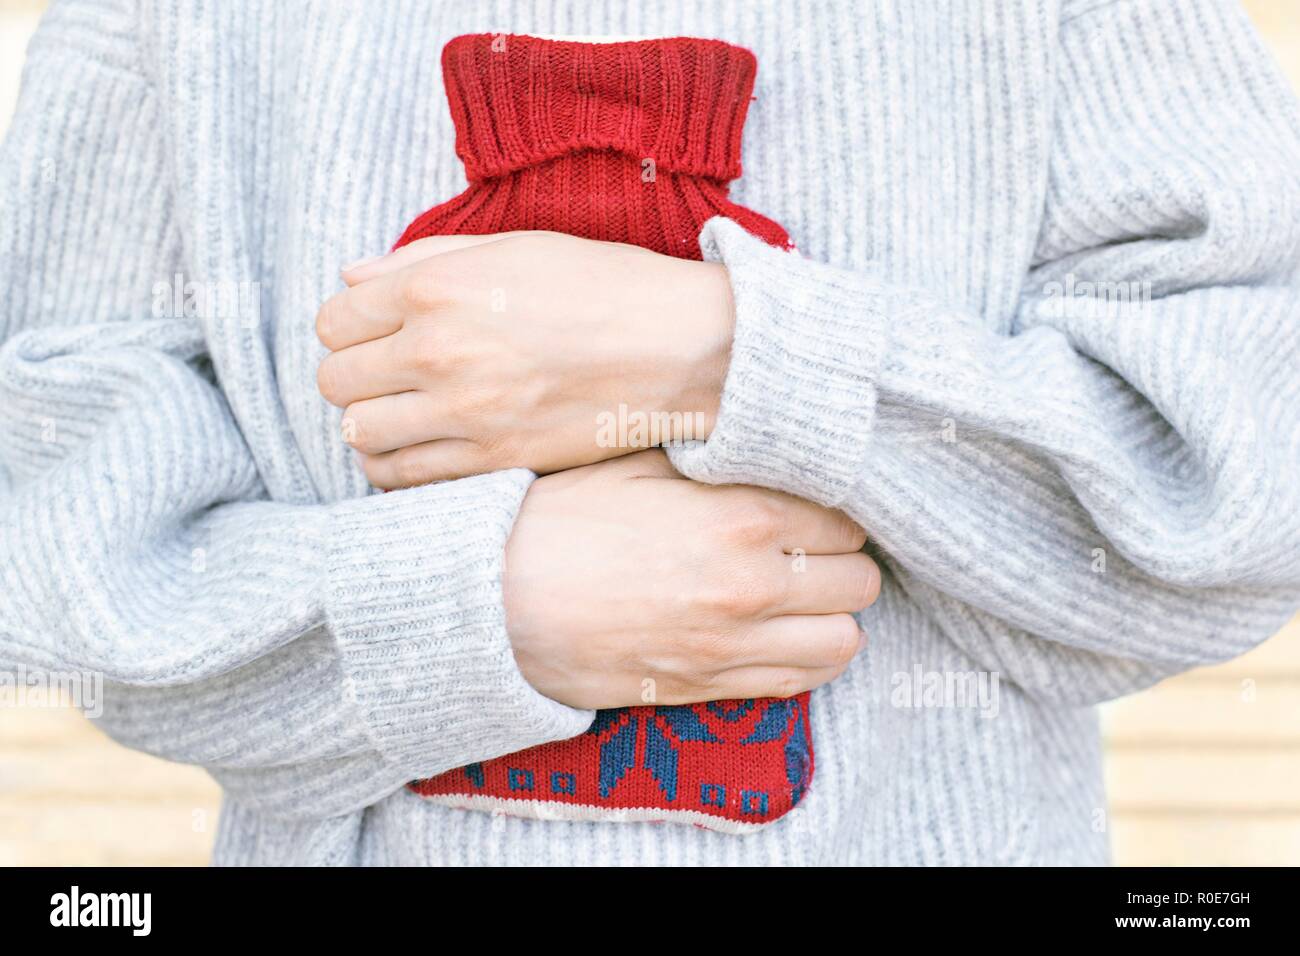 Woman holding hot water bottle, close up. Stock Photo